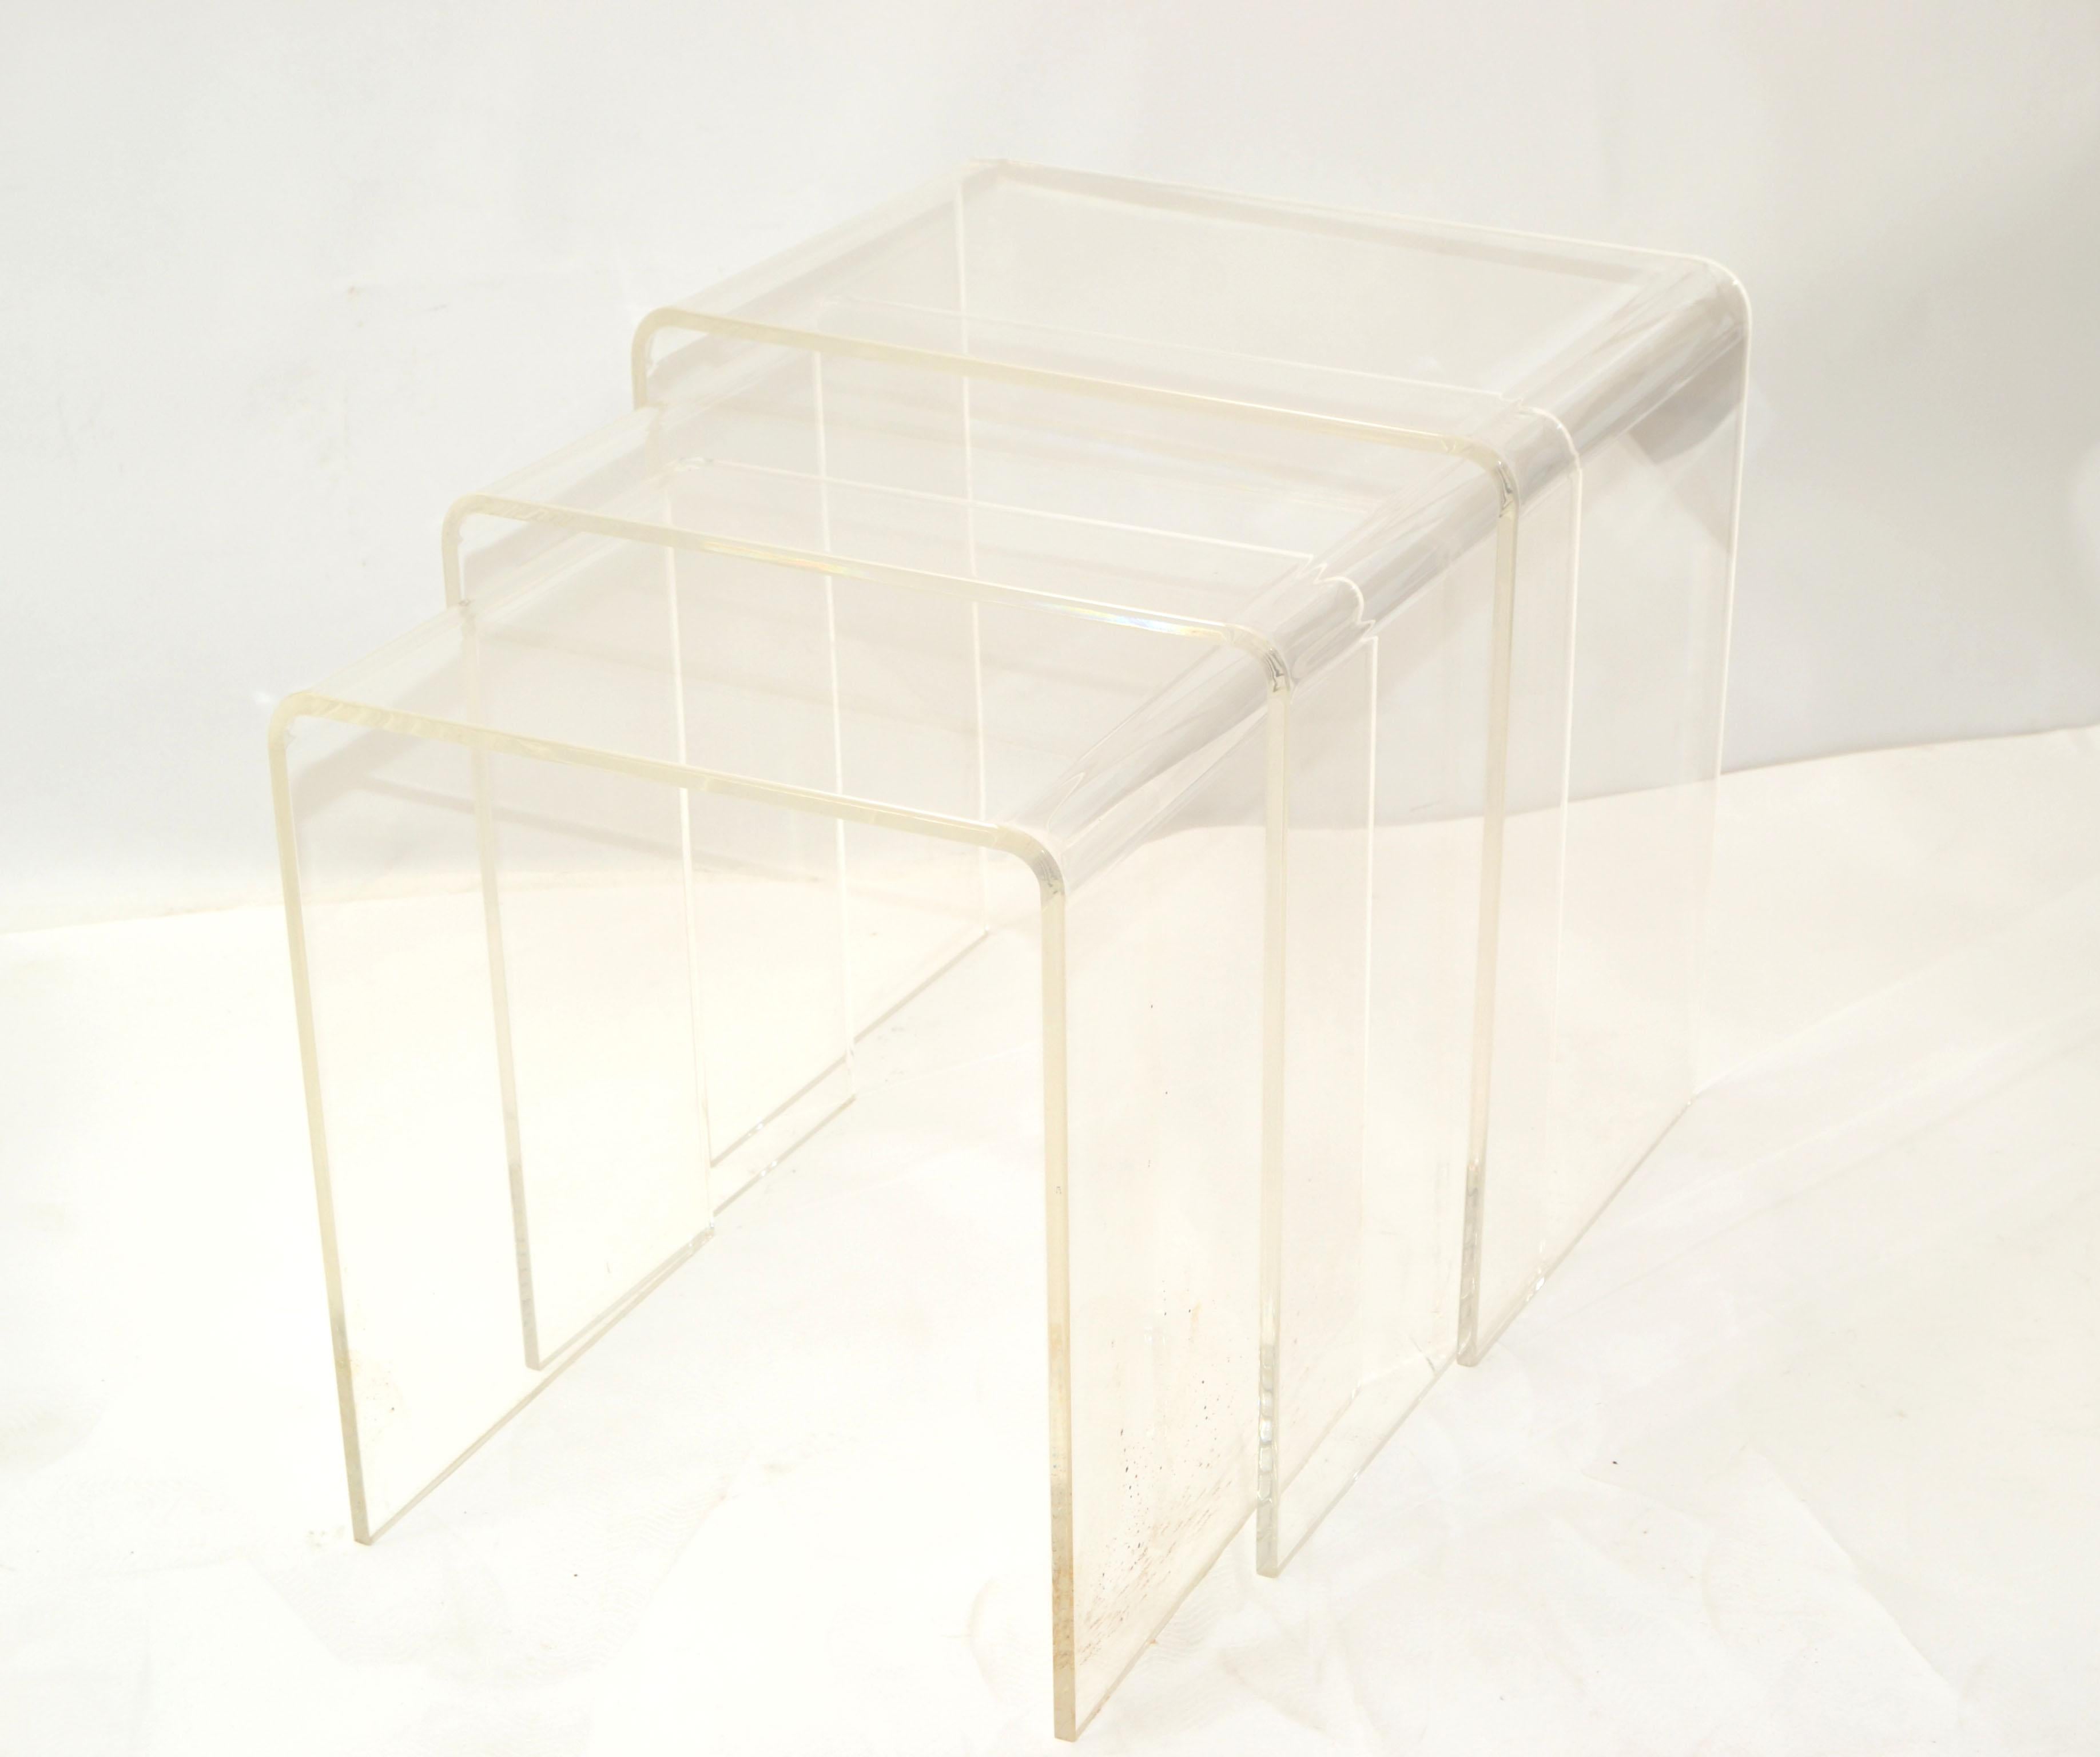 American Pair of Lucite Waterfall Nesting Tables / Stacking Tables, Stools, Set of 3